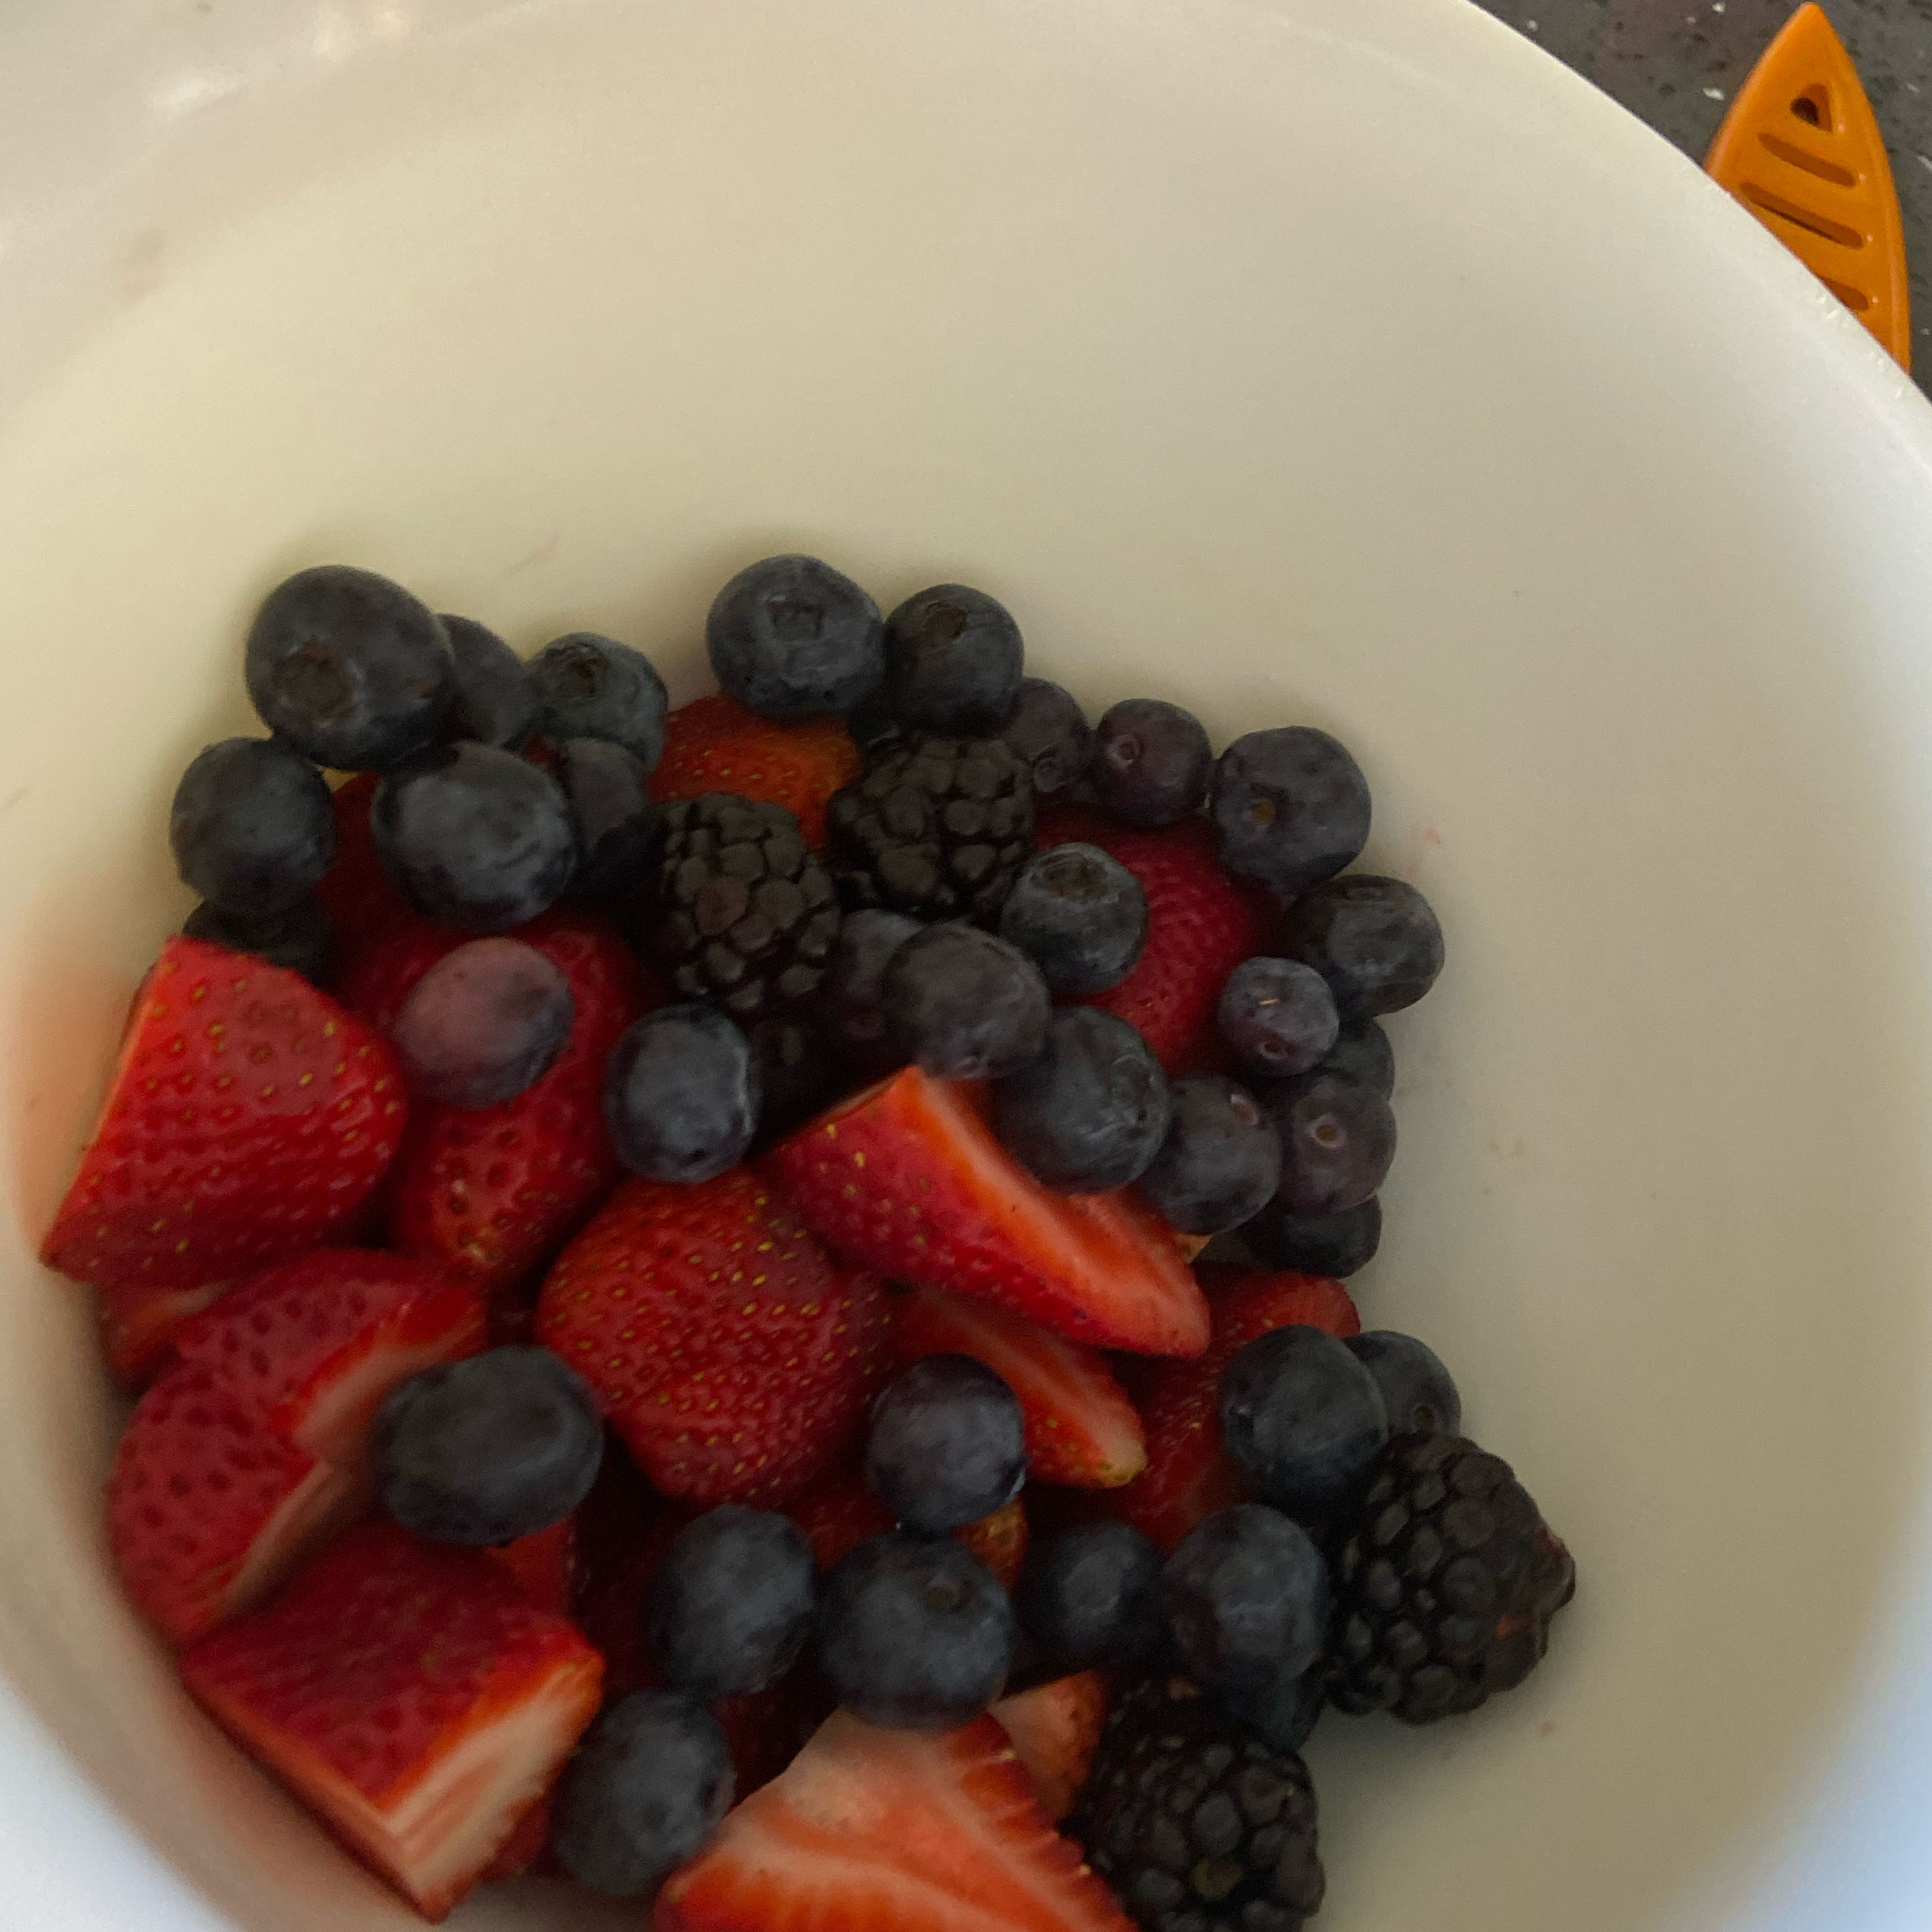 Put a cup of the blueberries and raspberries into the bowl with the strawberries